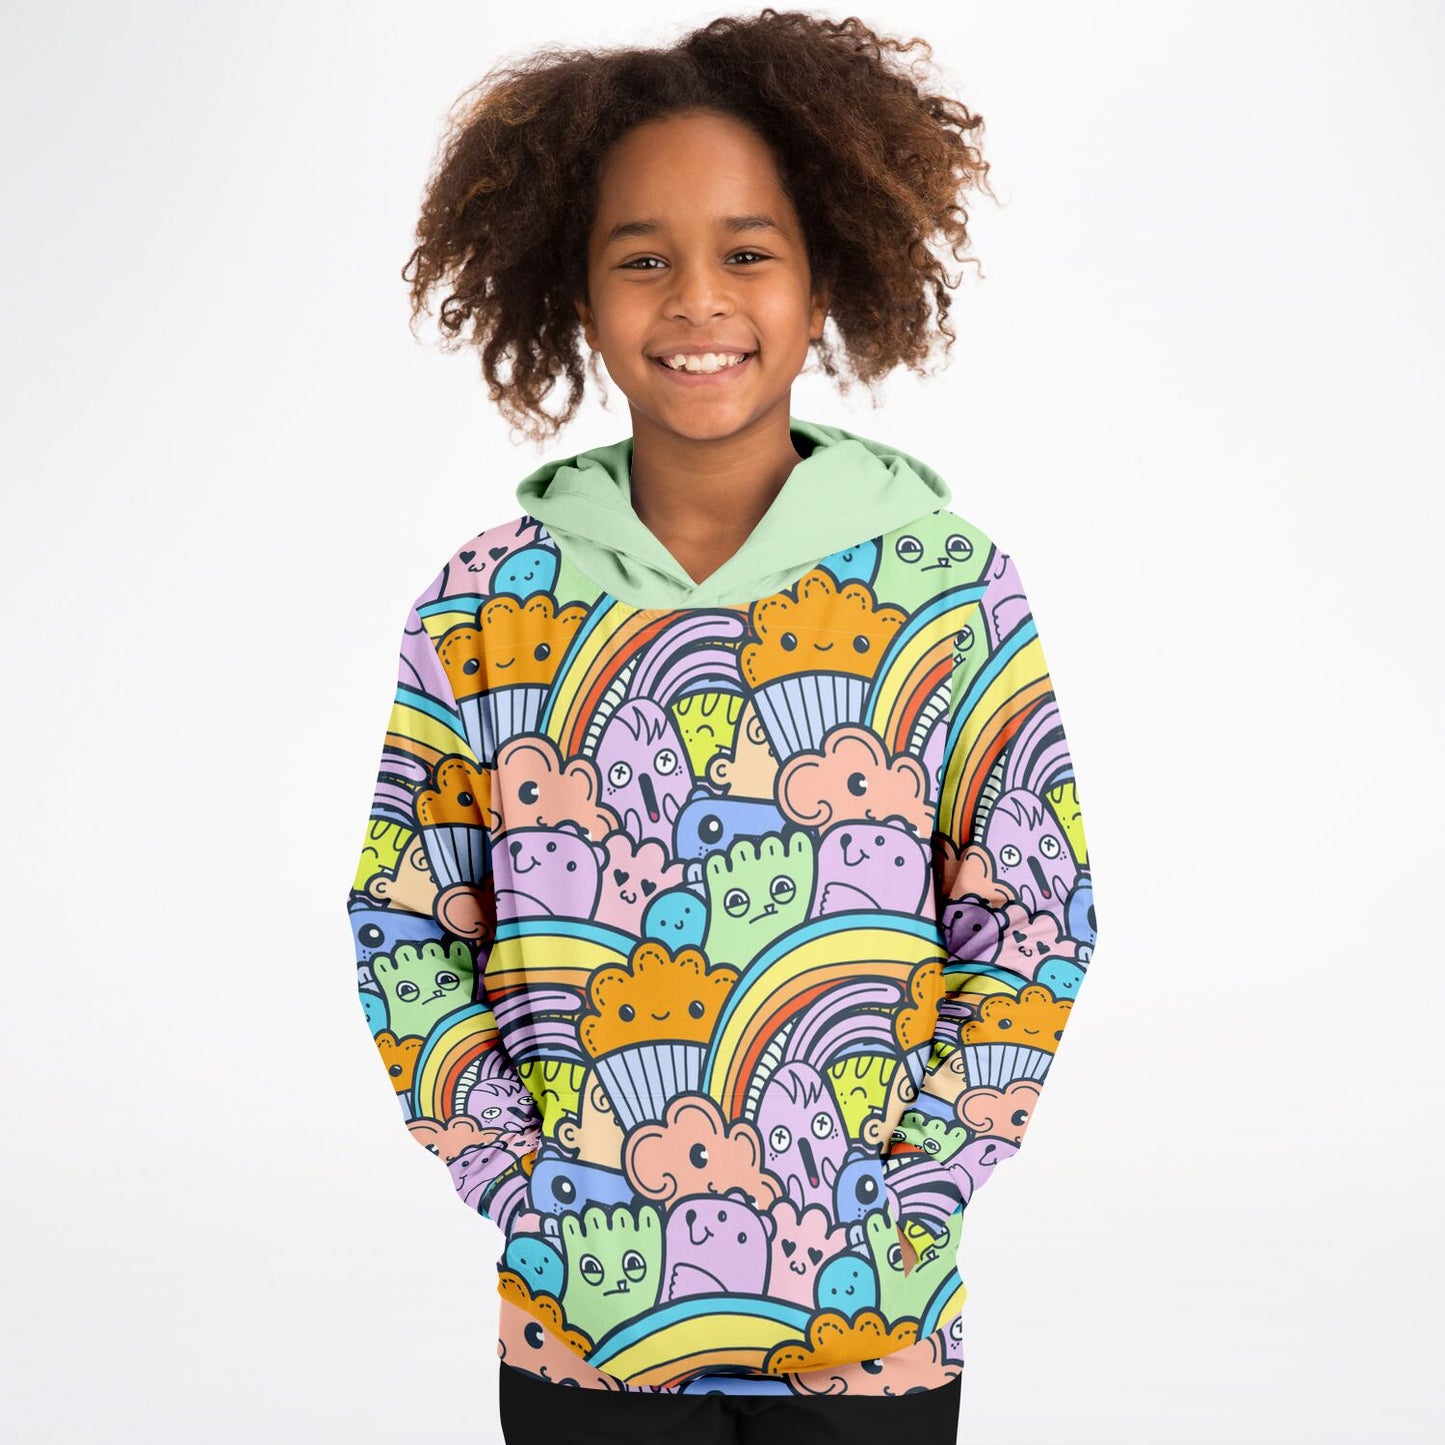 Adorable Doodle Monster and Cloud Hoodie for Children - Sport Finesse